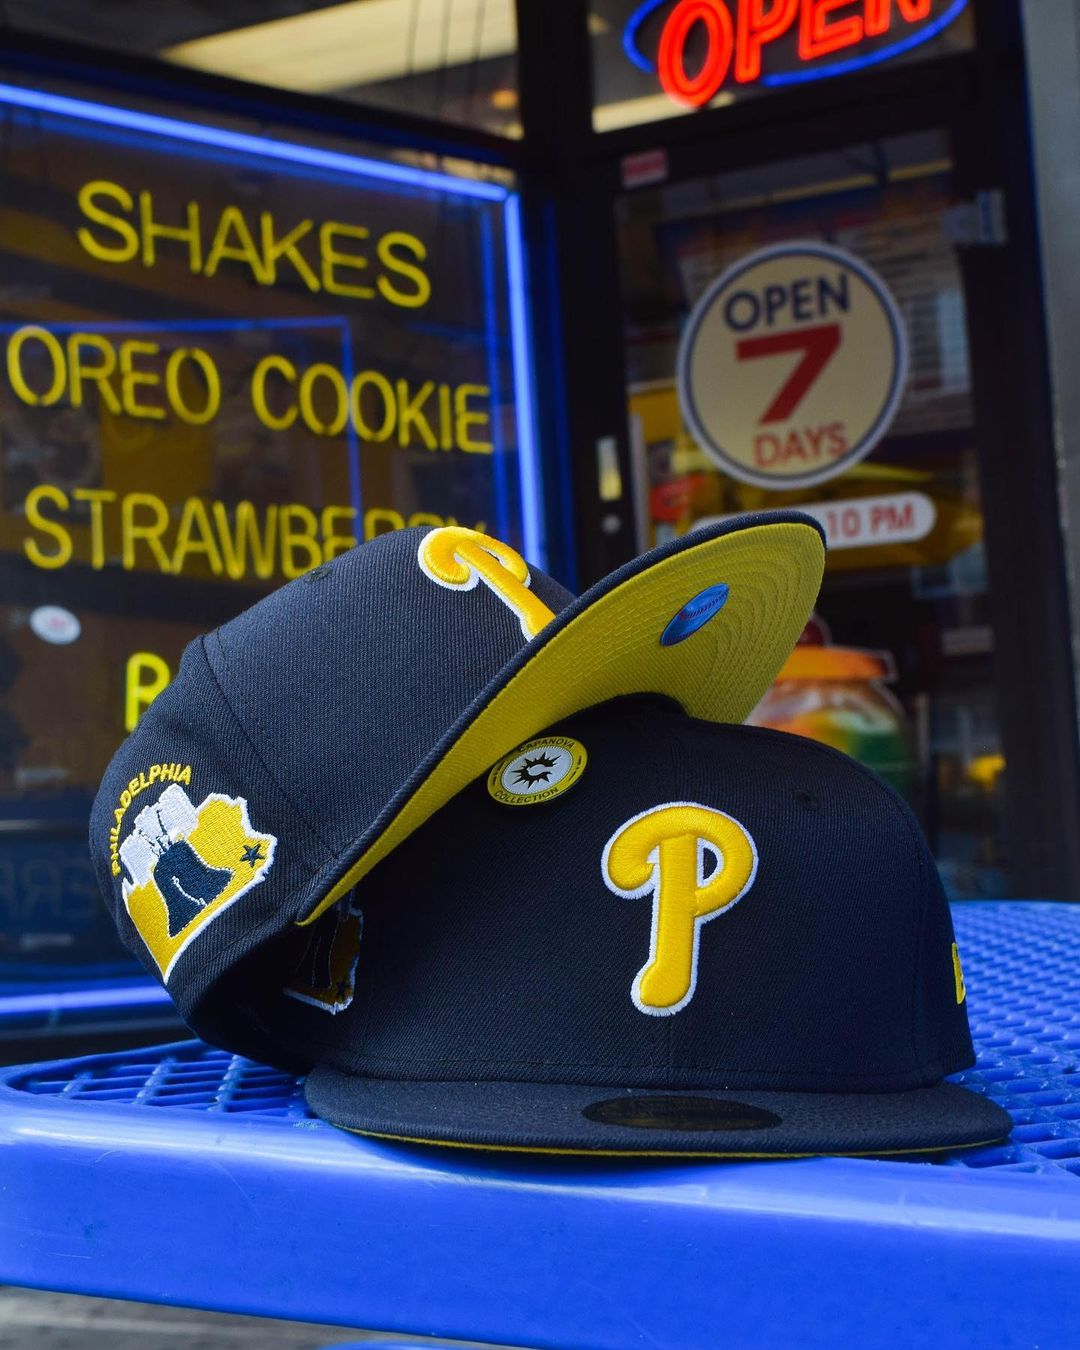 Steak and Lemonade Fitted Hats